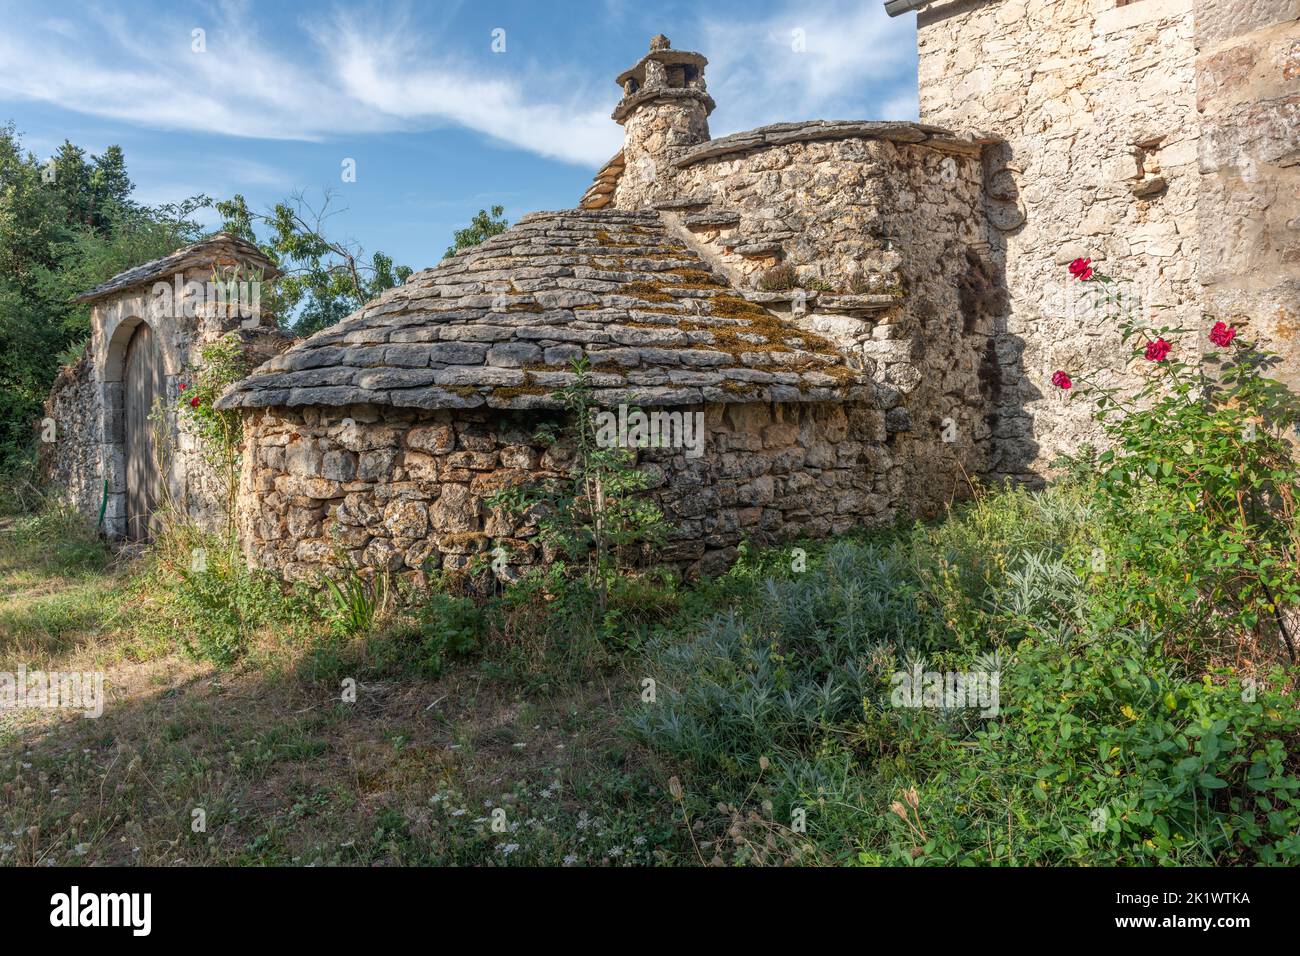 Stone house, traditional house of Causse mejean, limestone architecture. Cevennes, France. Stock Photo